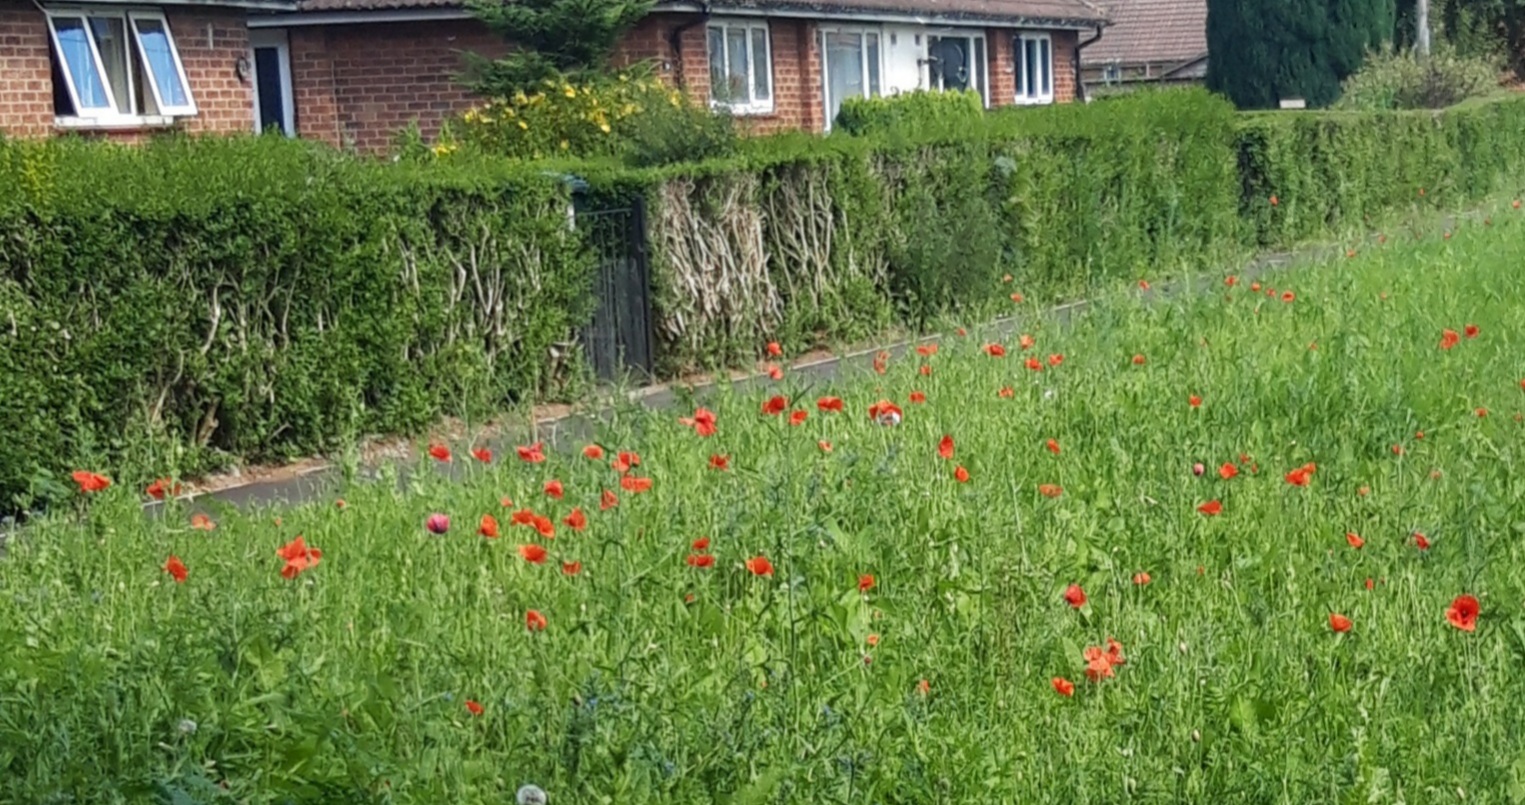 A meadow in the street